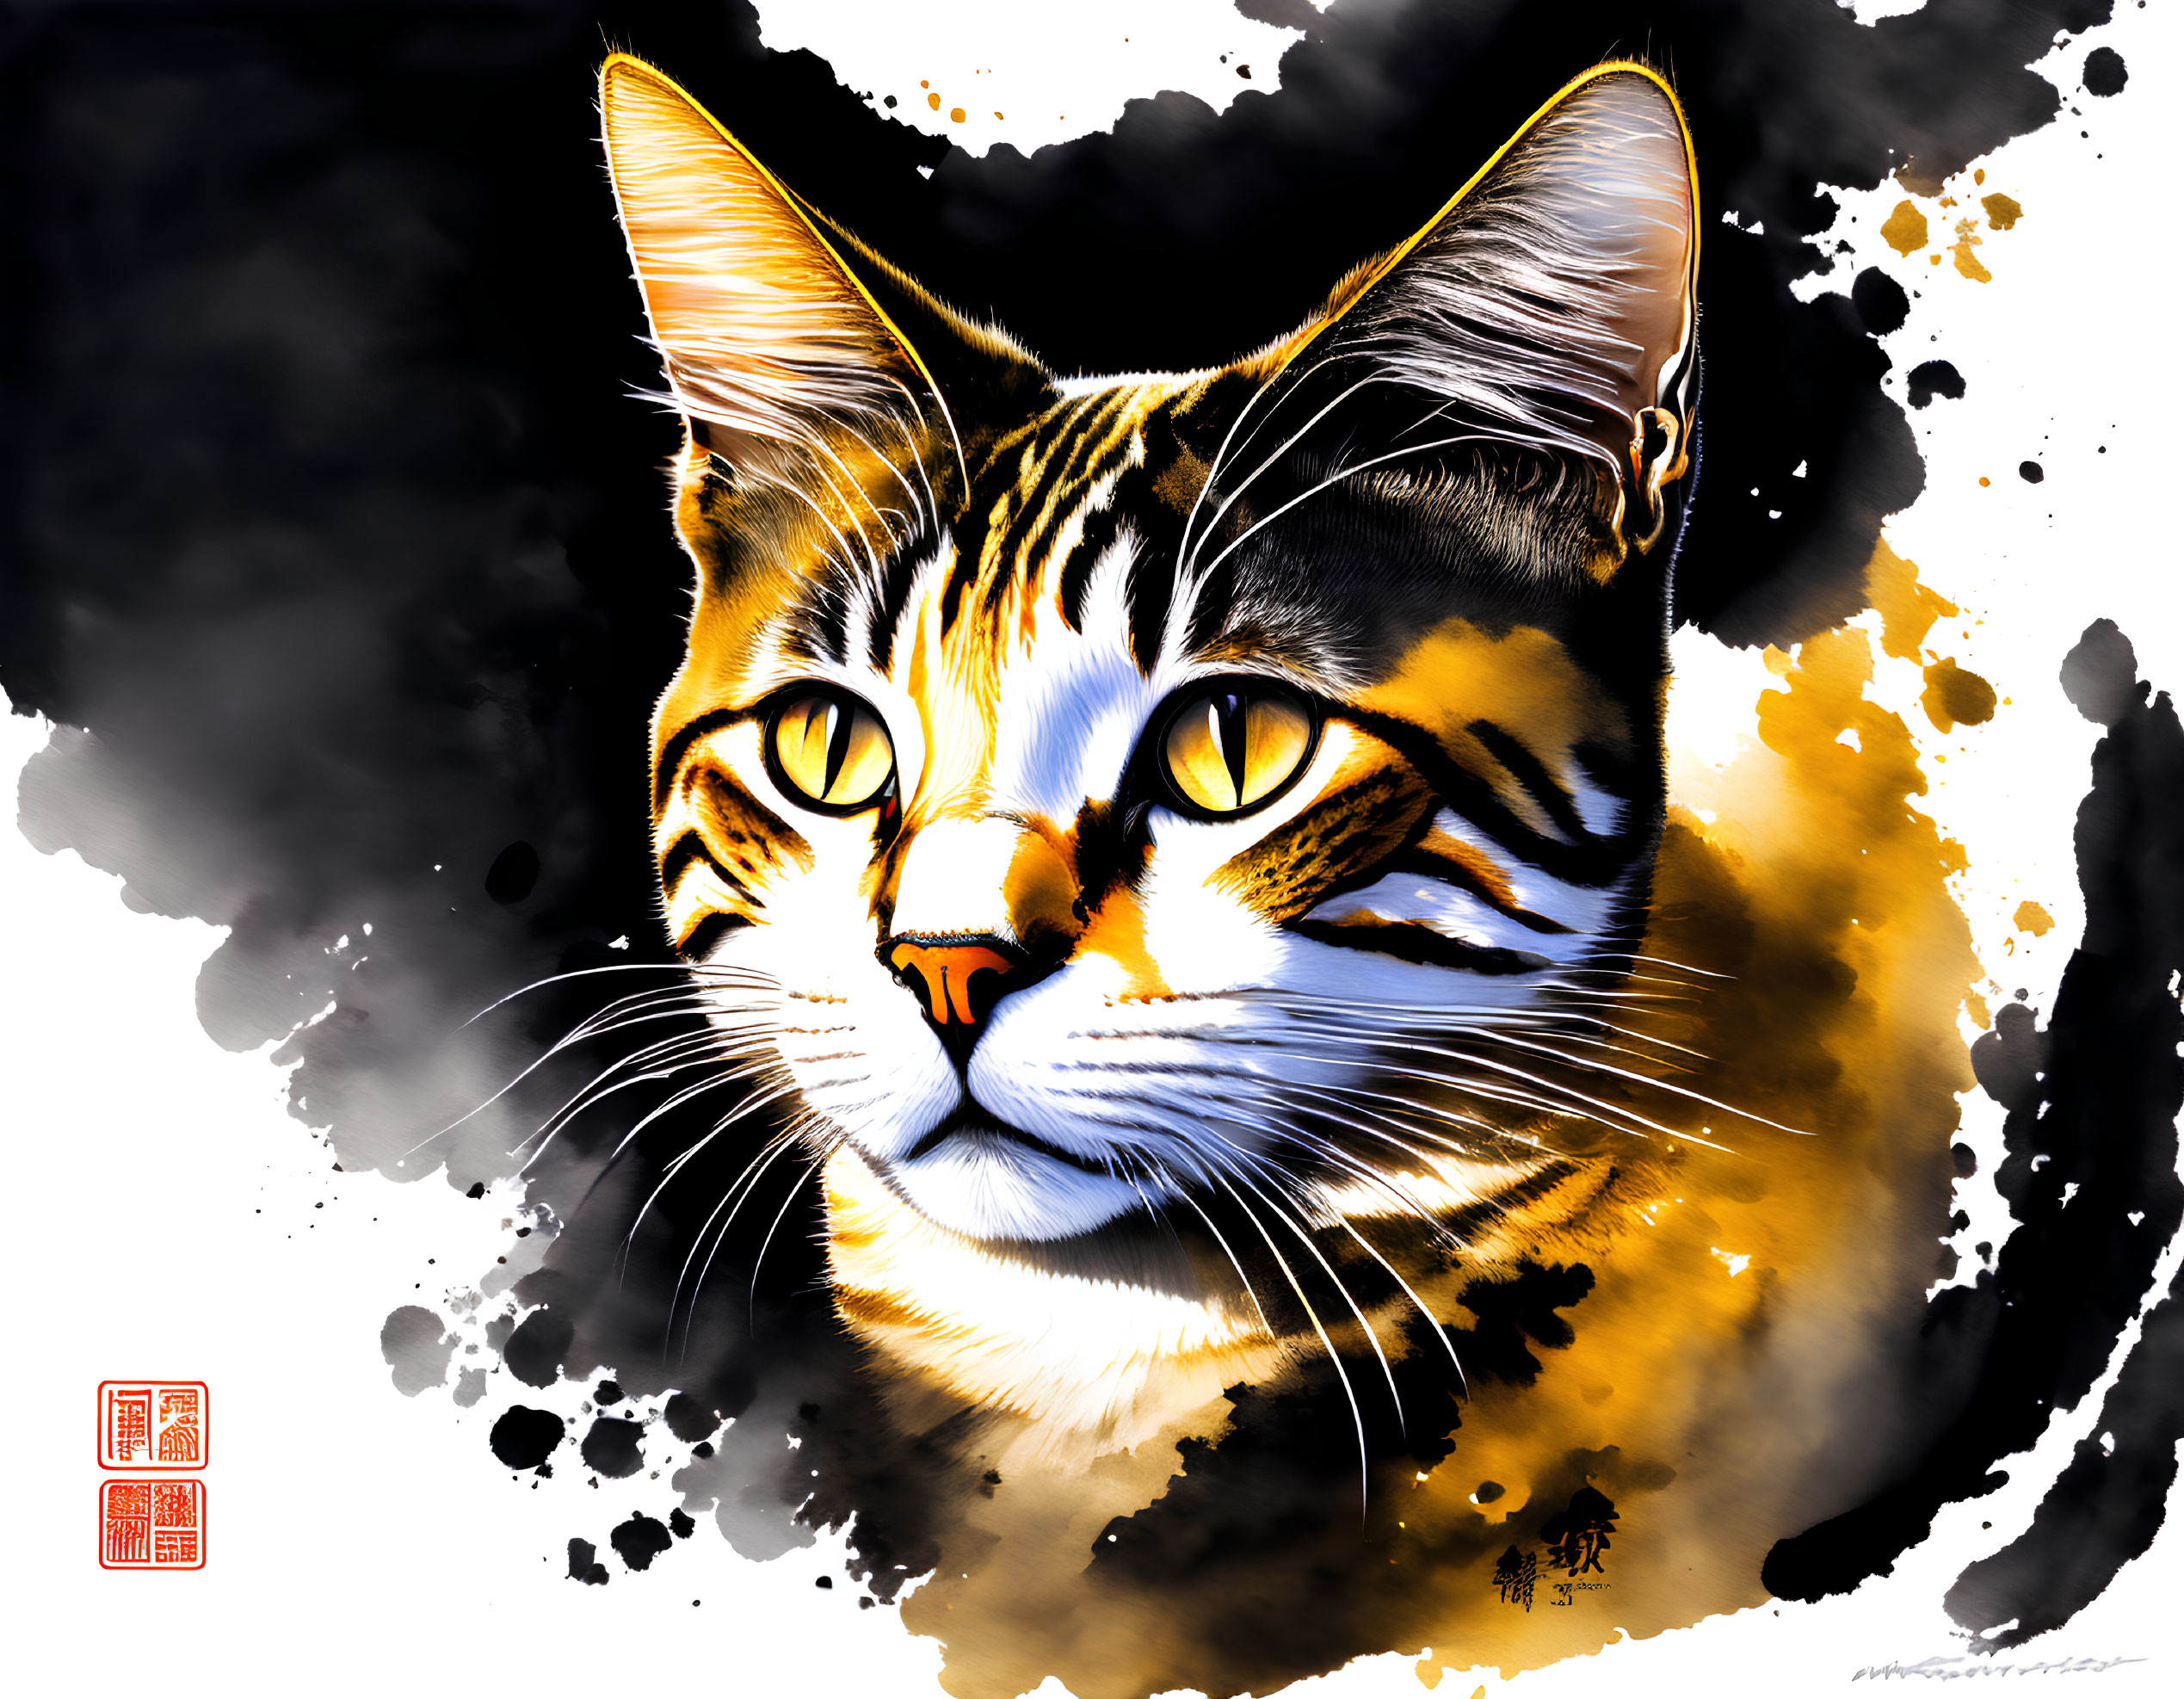 Tabby Cat Digital Painting with Orange Eyes on Dramatic Black and Gold Background